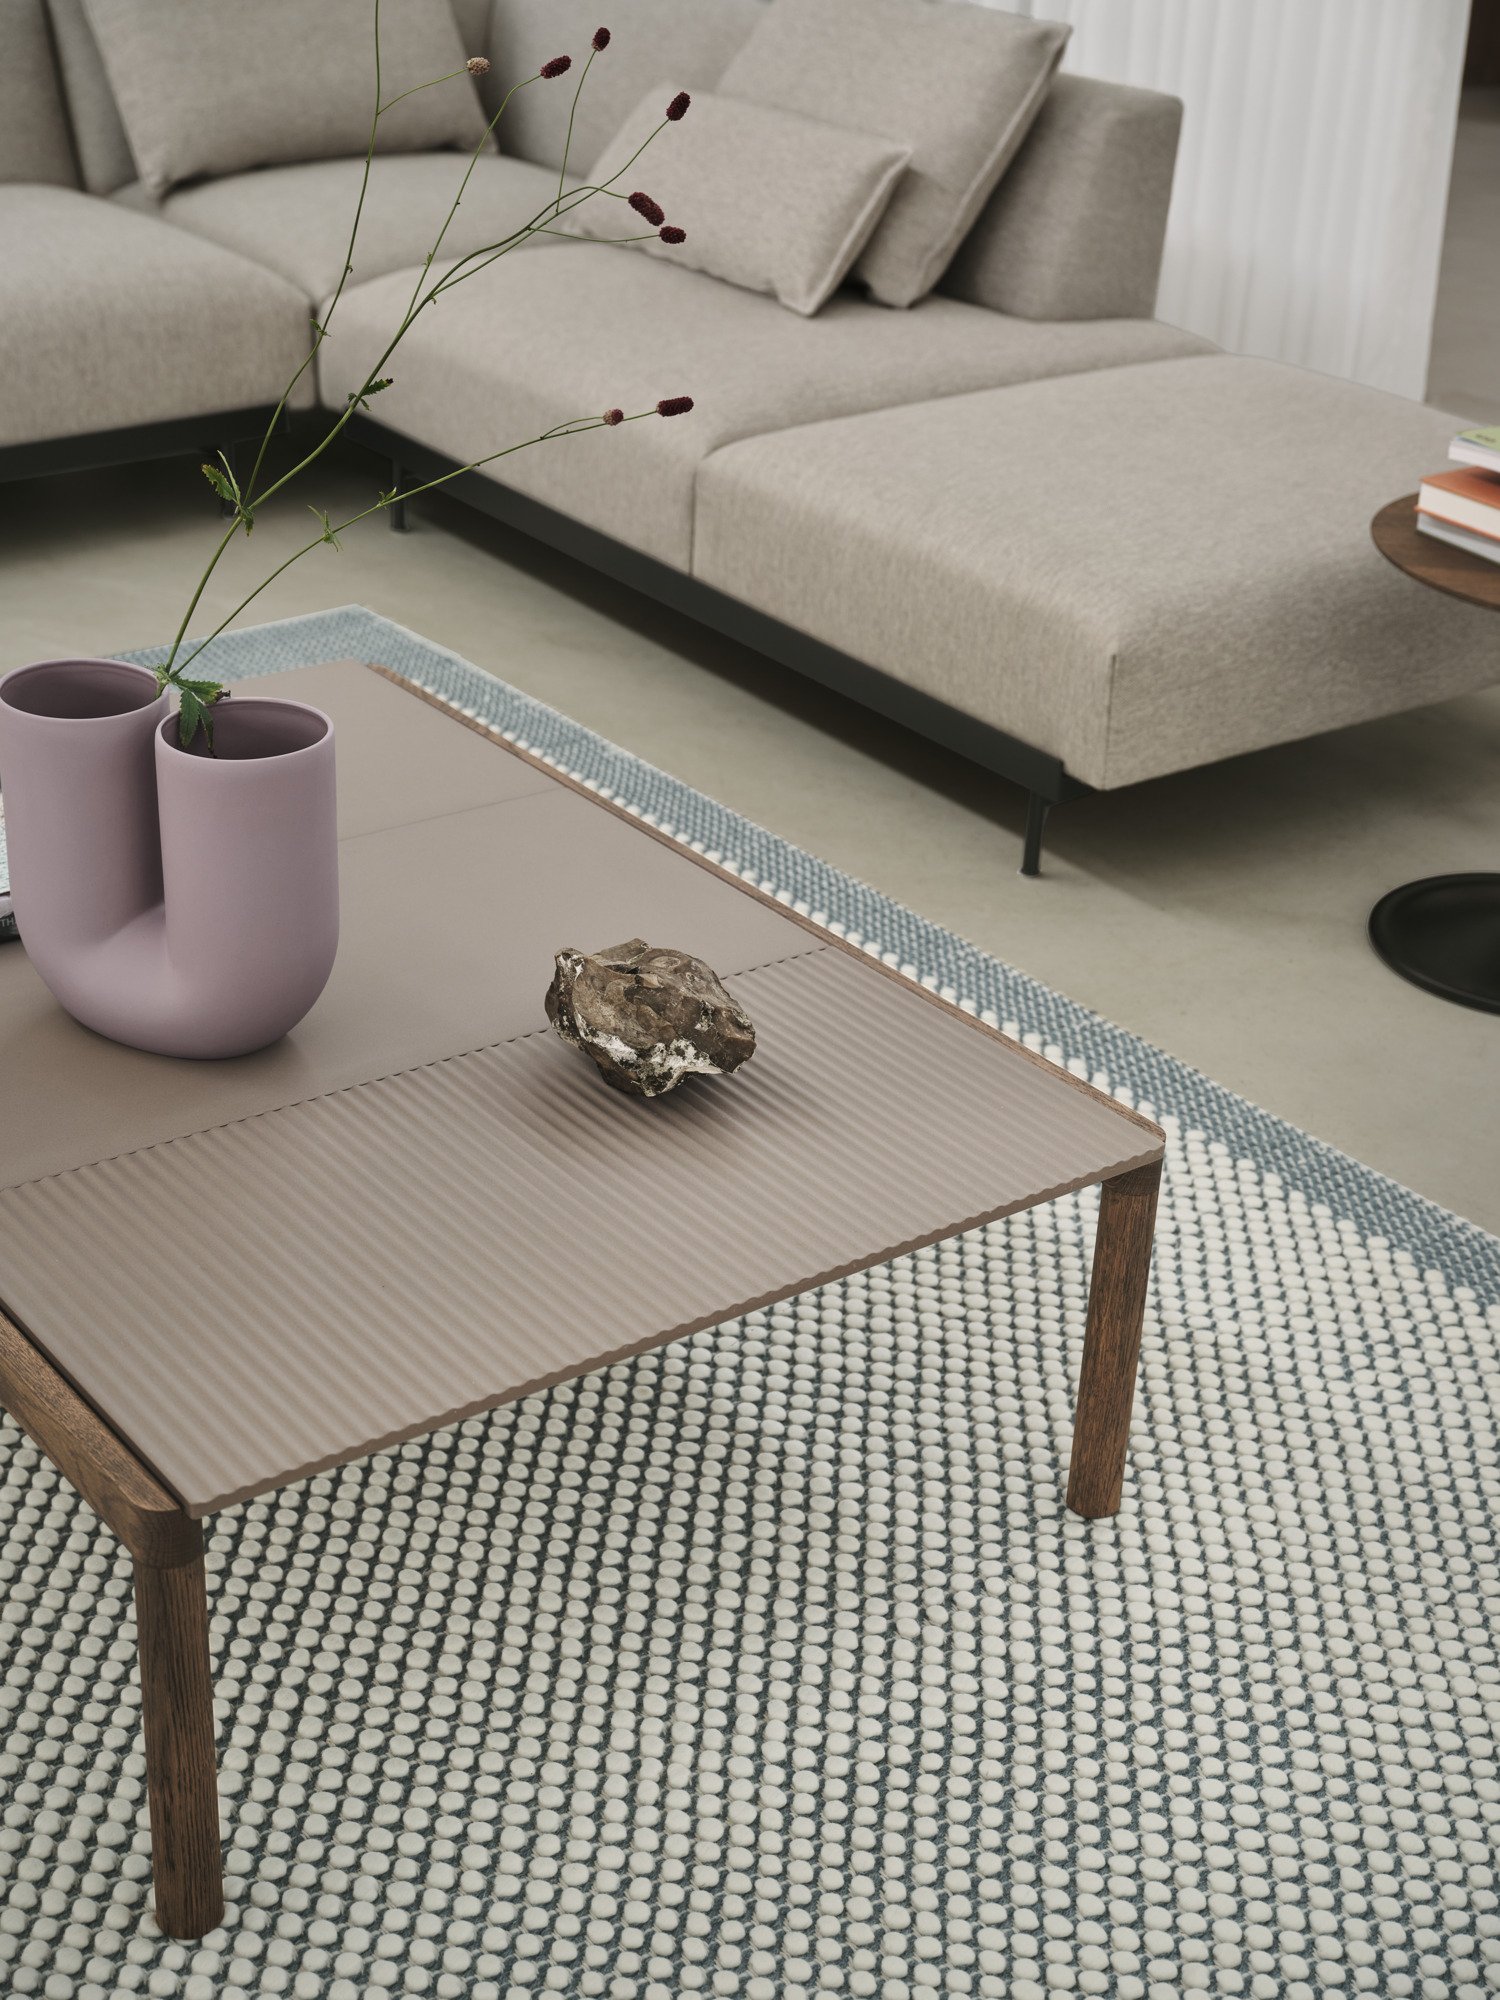 Couple Coffee Table 120x84x35 2 Plain 1 Wavy in Taupe/Dark Oiled Oak, Pebble Rug in Pale Blue, Kink Vase in Dusty Lilac, In Situ Modular Sofa in Clay 12, Soft Side Table in Black/Smoked Oak